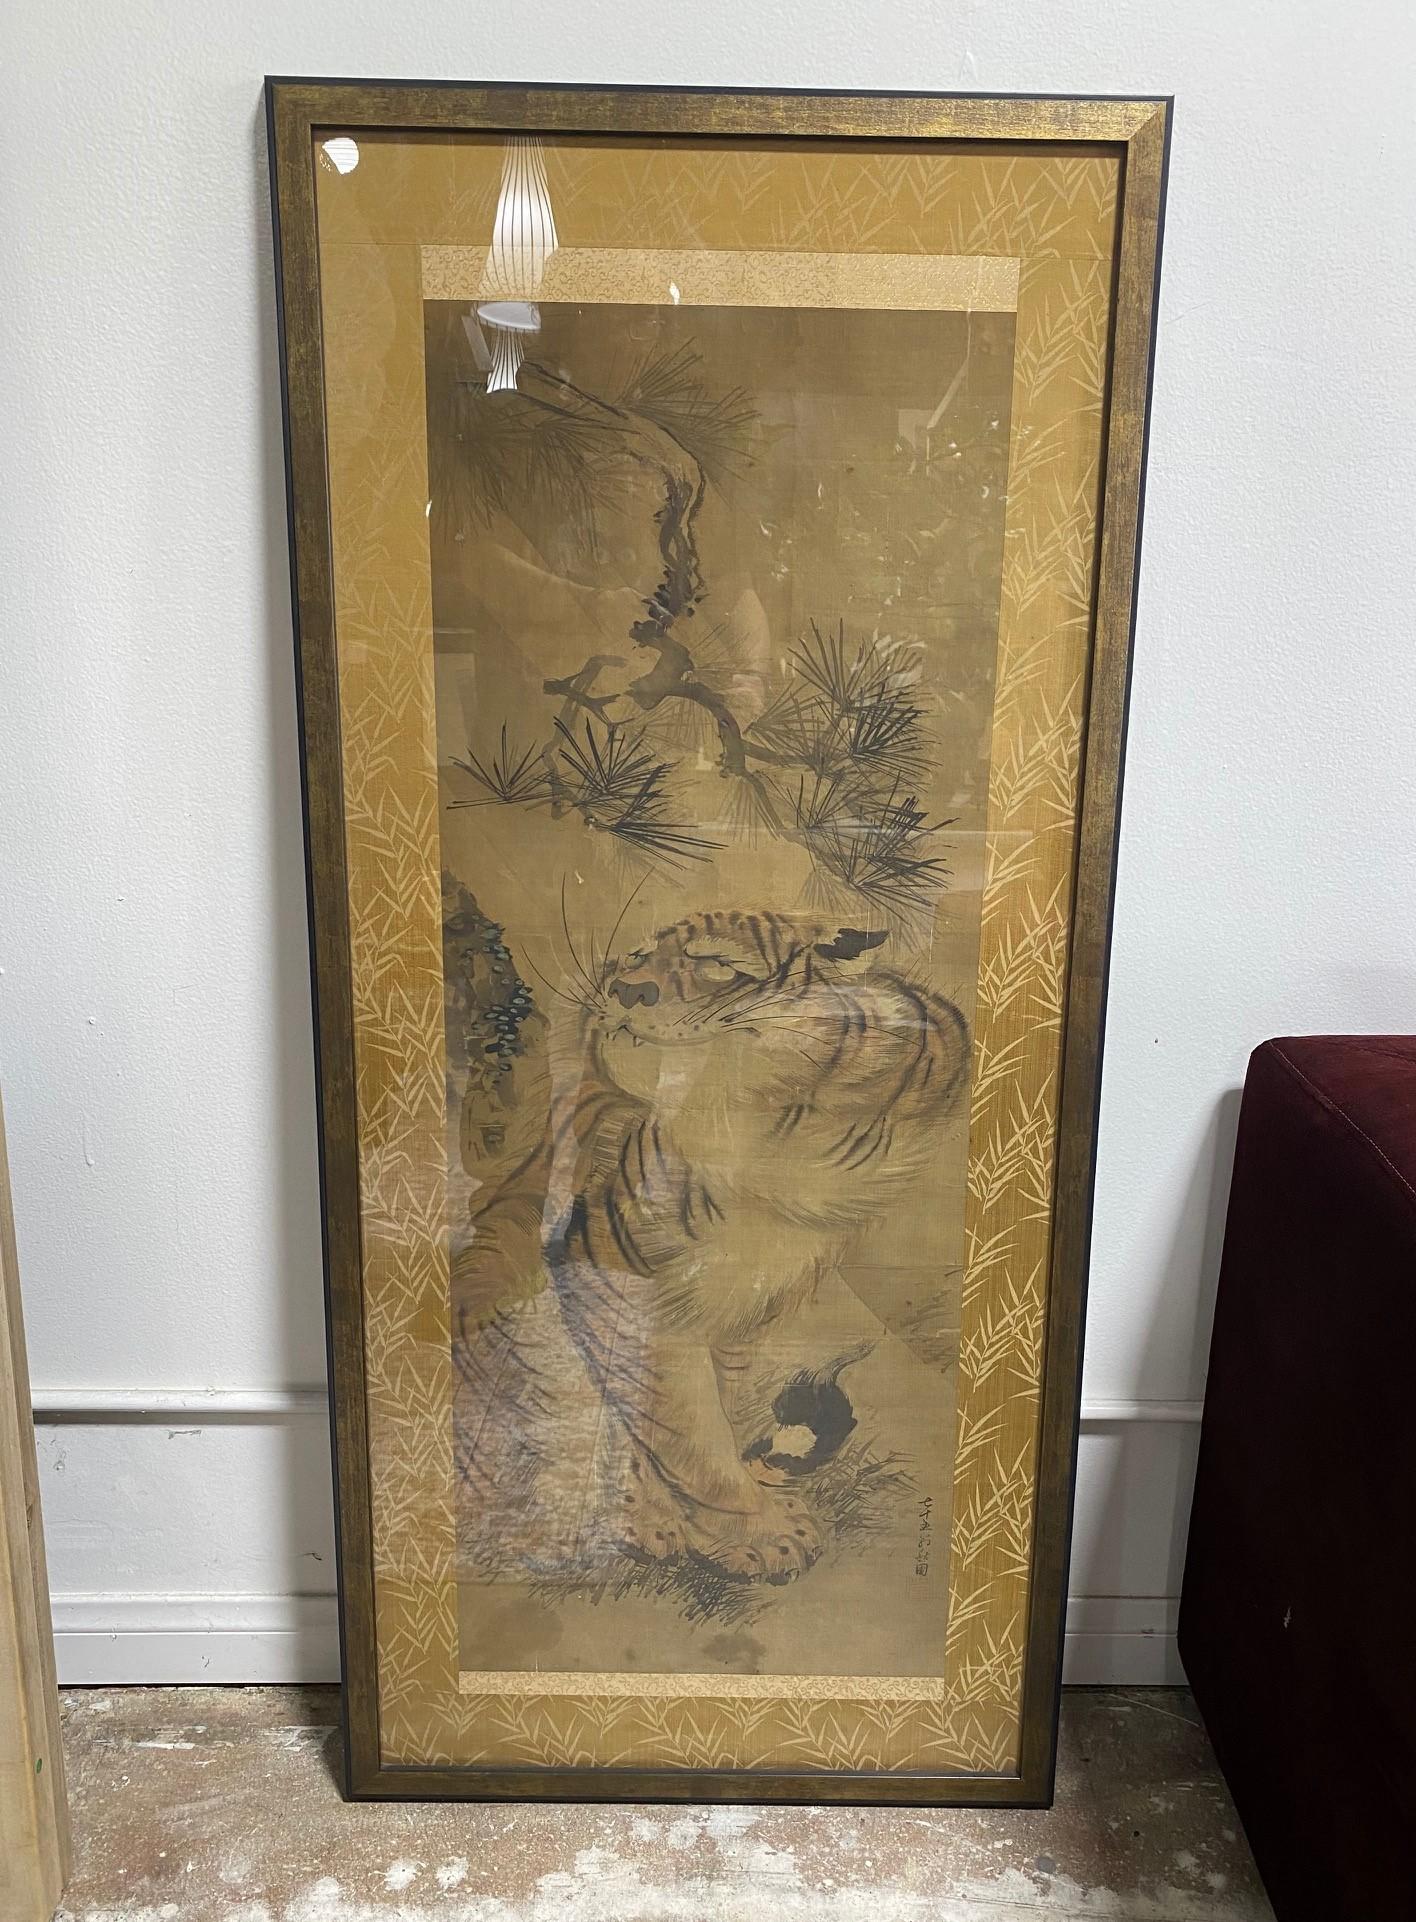 A beautiful and striking Japanese Edo period tiger scroll. Hand-painted with masterful brushstrokes on a silk surface. Wonderfully captured and composed with a hint of whimsy and mischief. 

We believe this could be the work of Saito Shuho